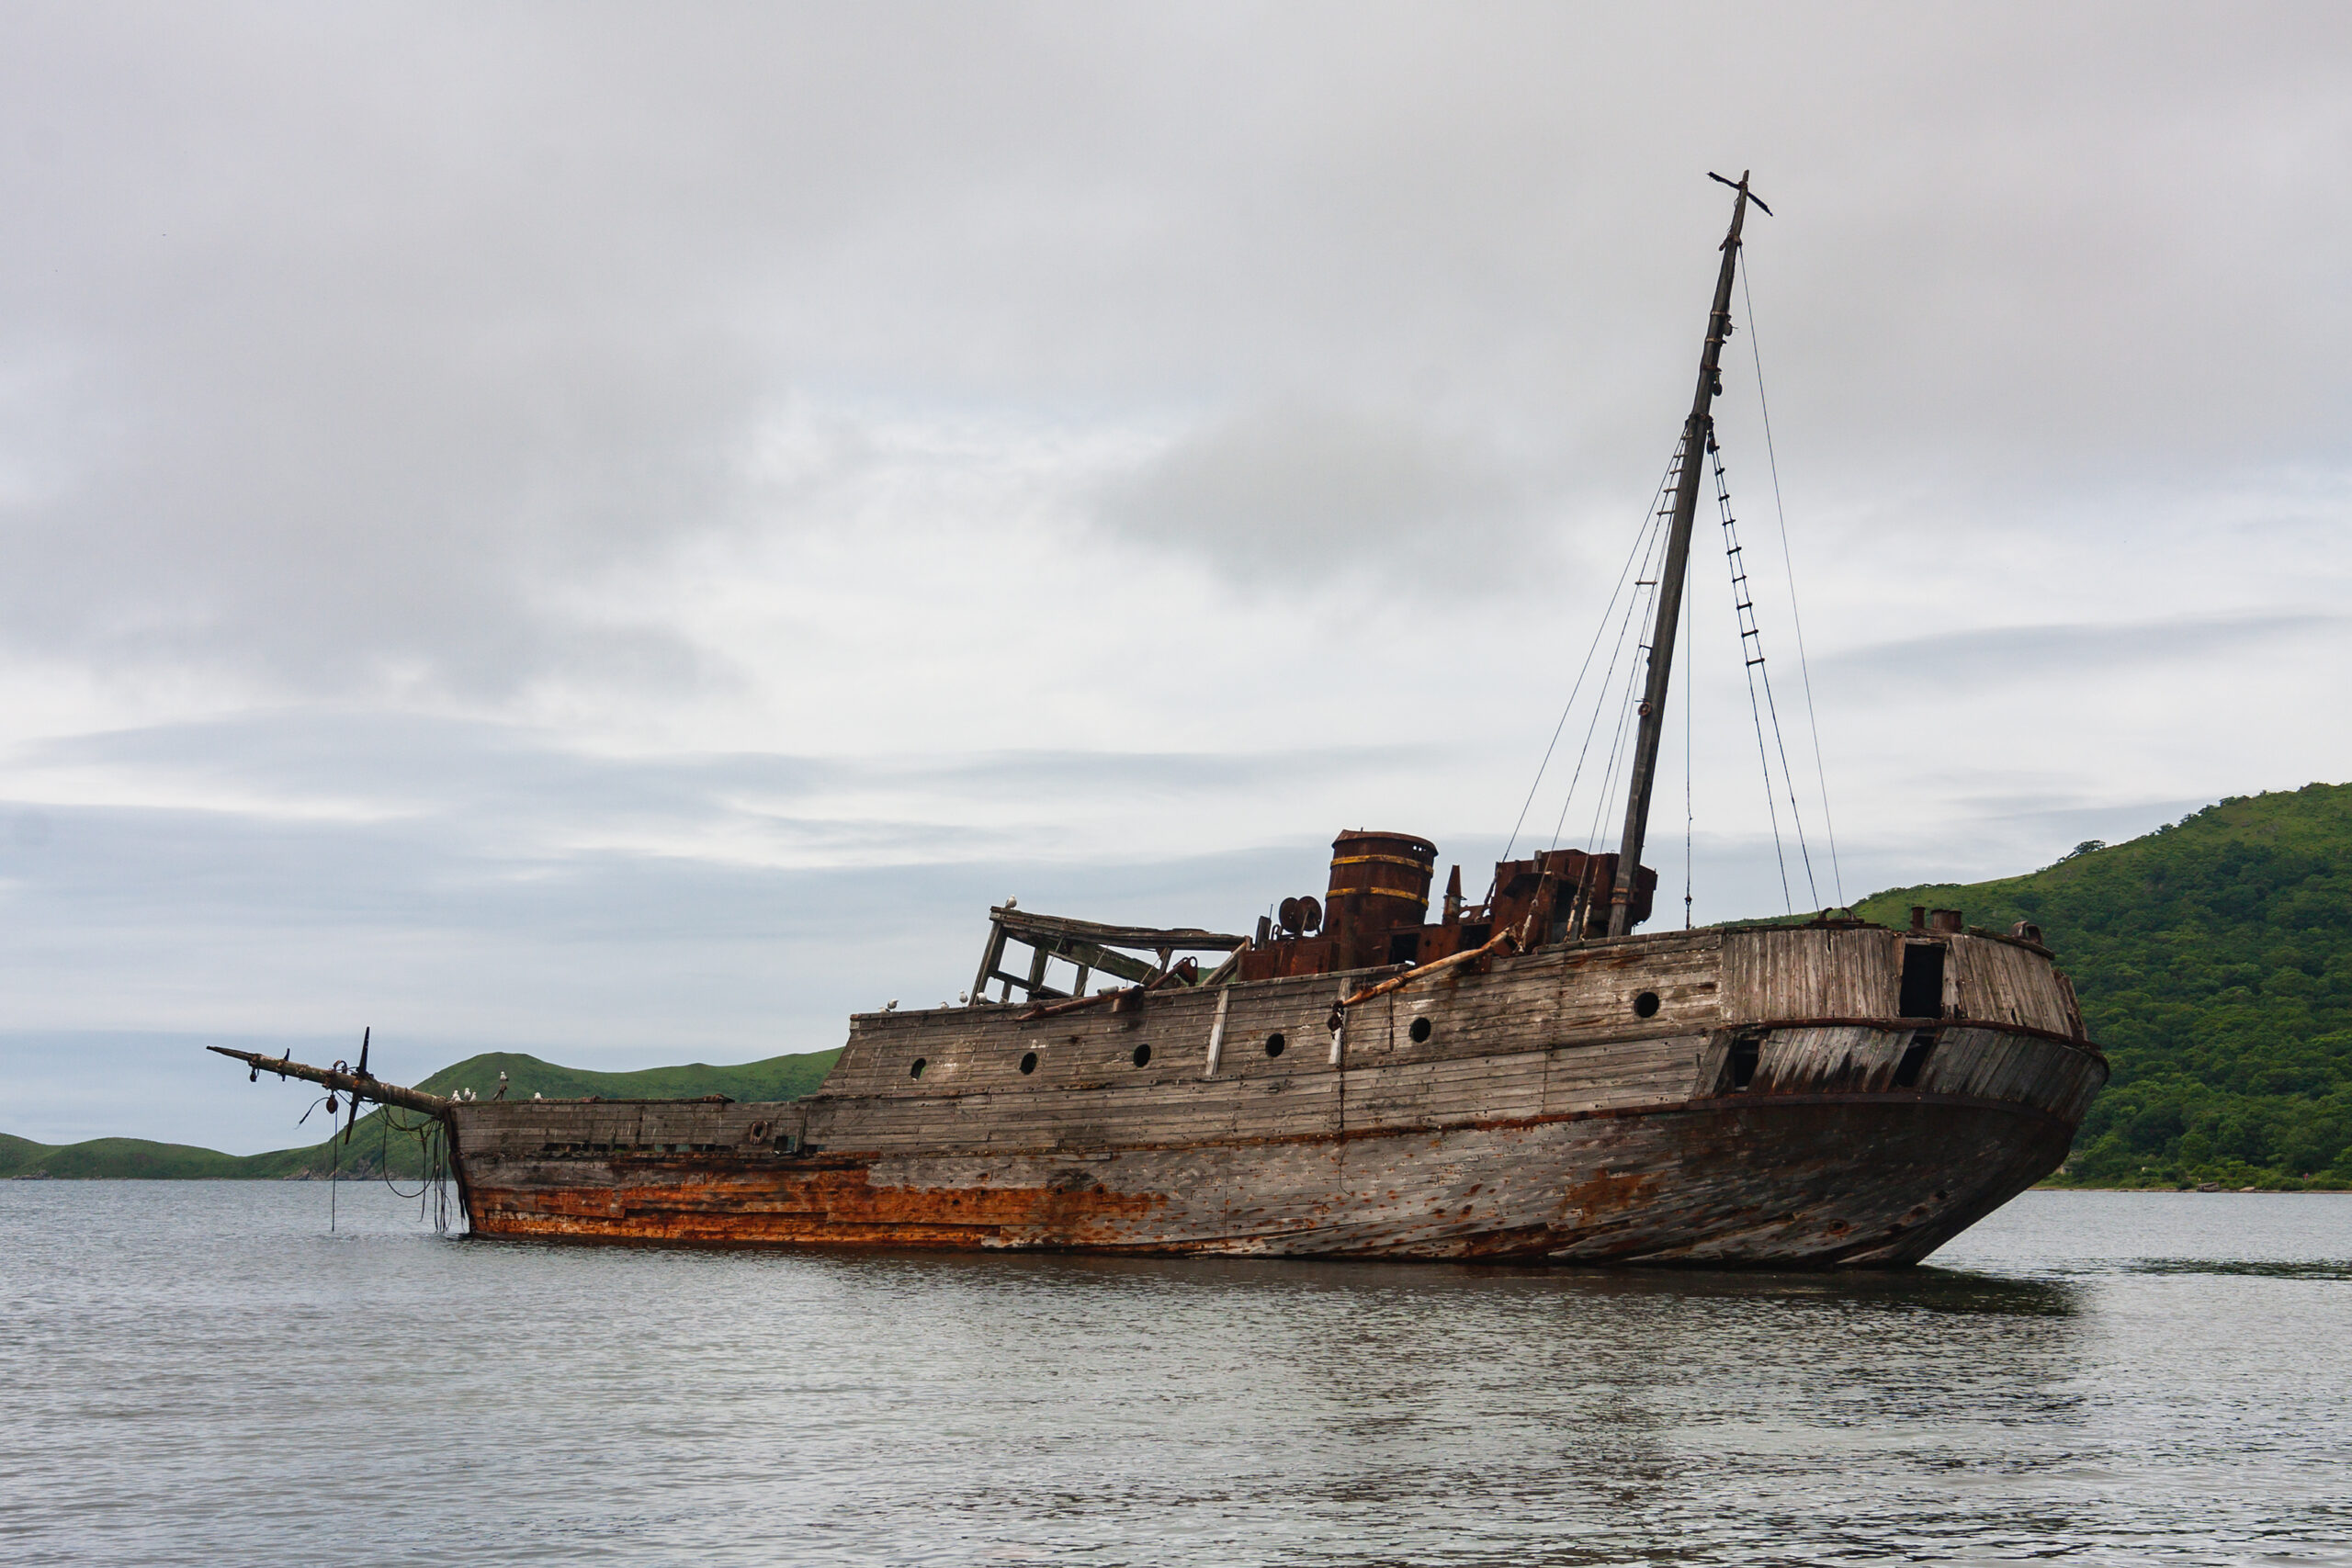 An,Old,Wooden,Soviet,Whaling,Boat,,The,Ship,Ran,Aground